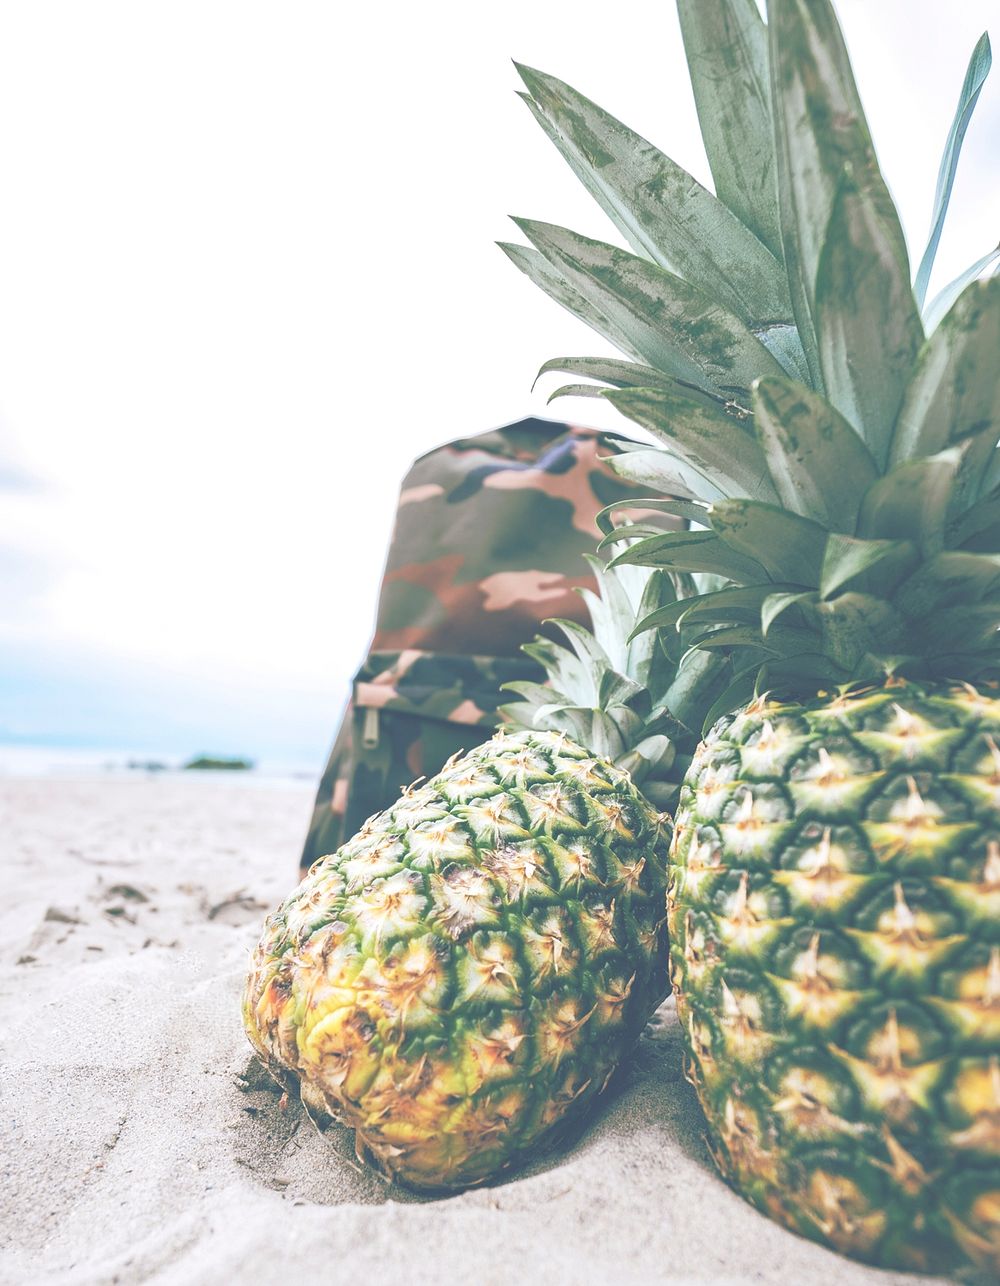 A pair of pineapples and a backpack on the beach.. Original public domain image from Wikimedia Commons